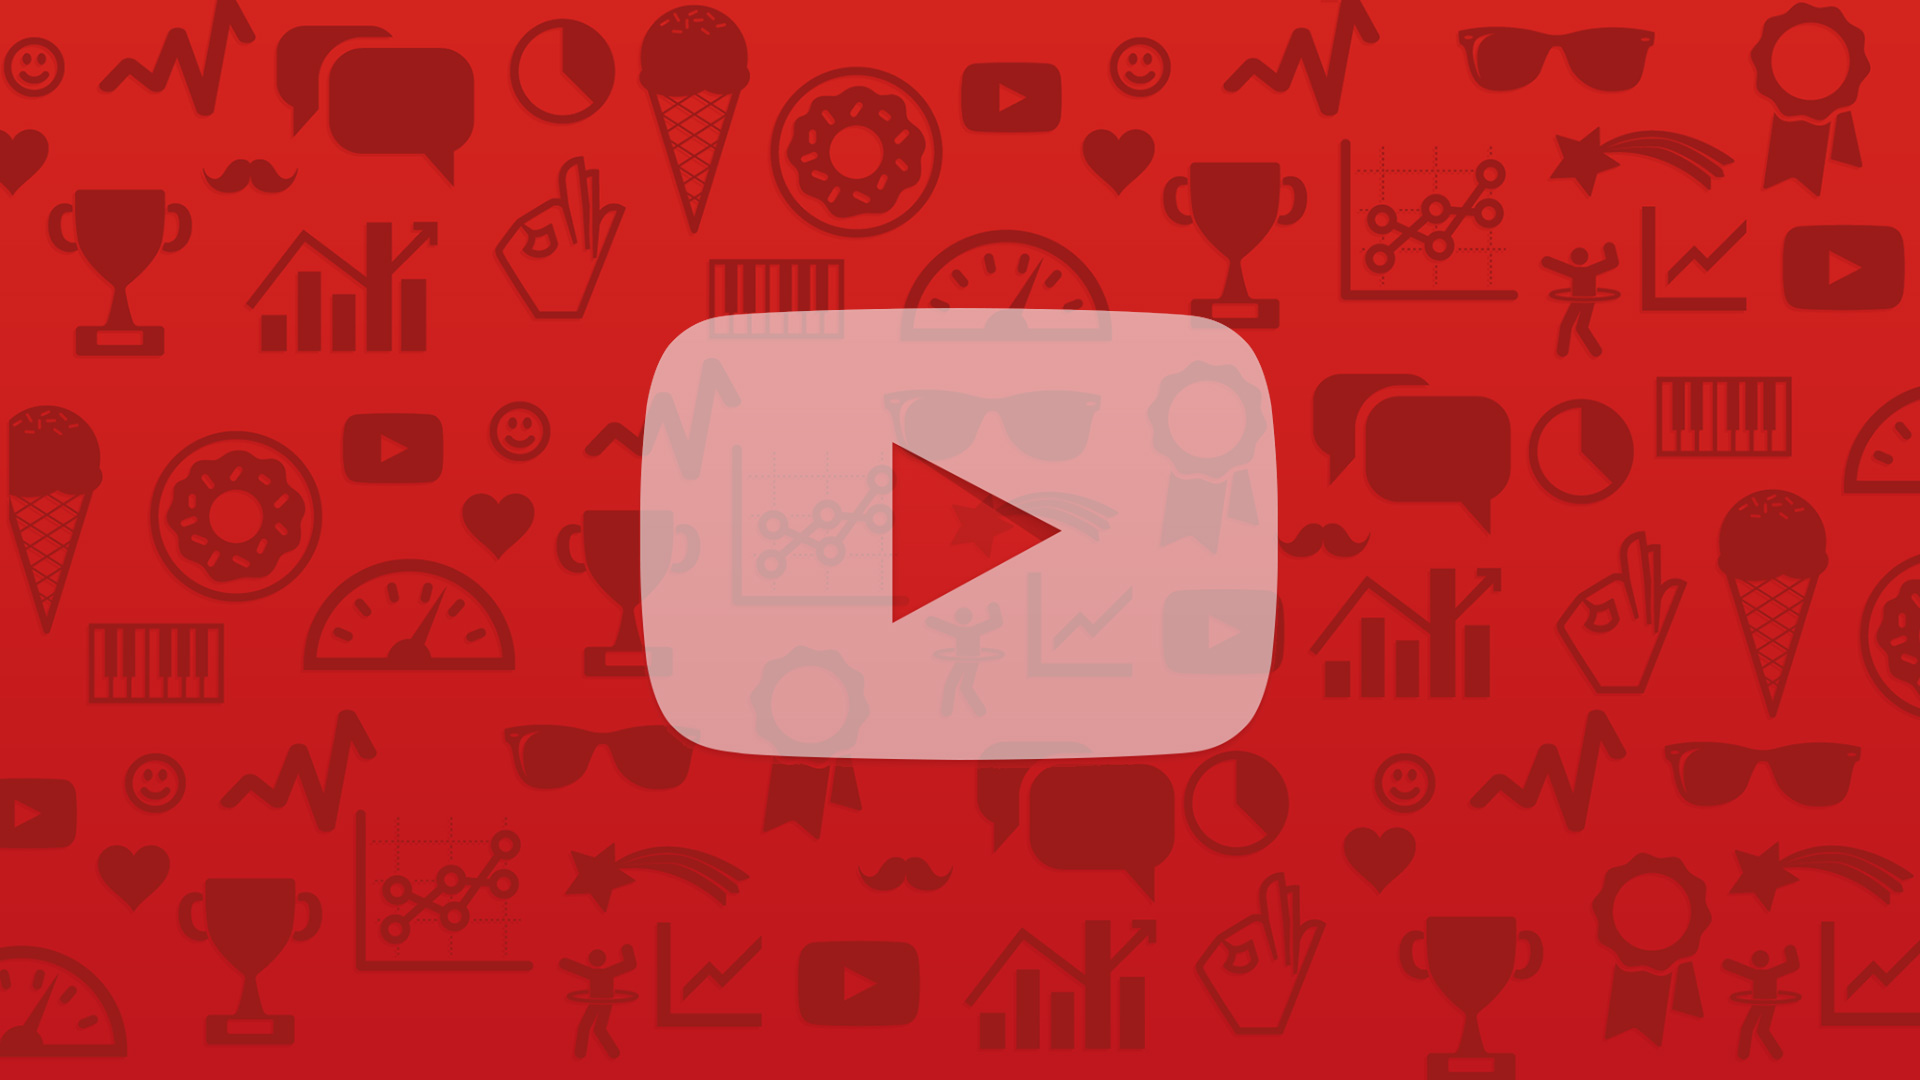 Social Media Trends 2016: Live Streaming and Video Marketing